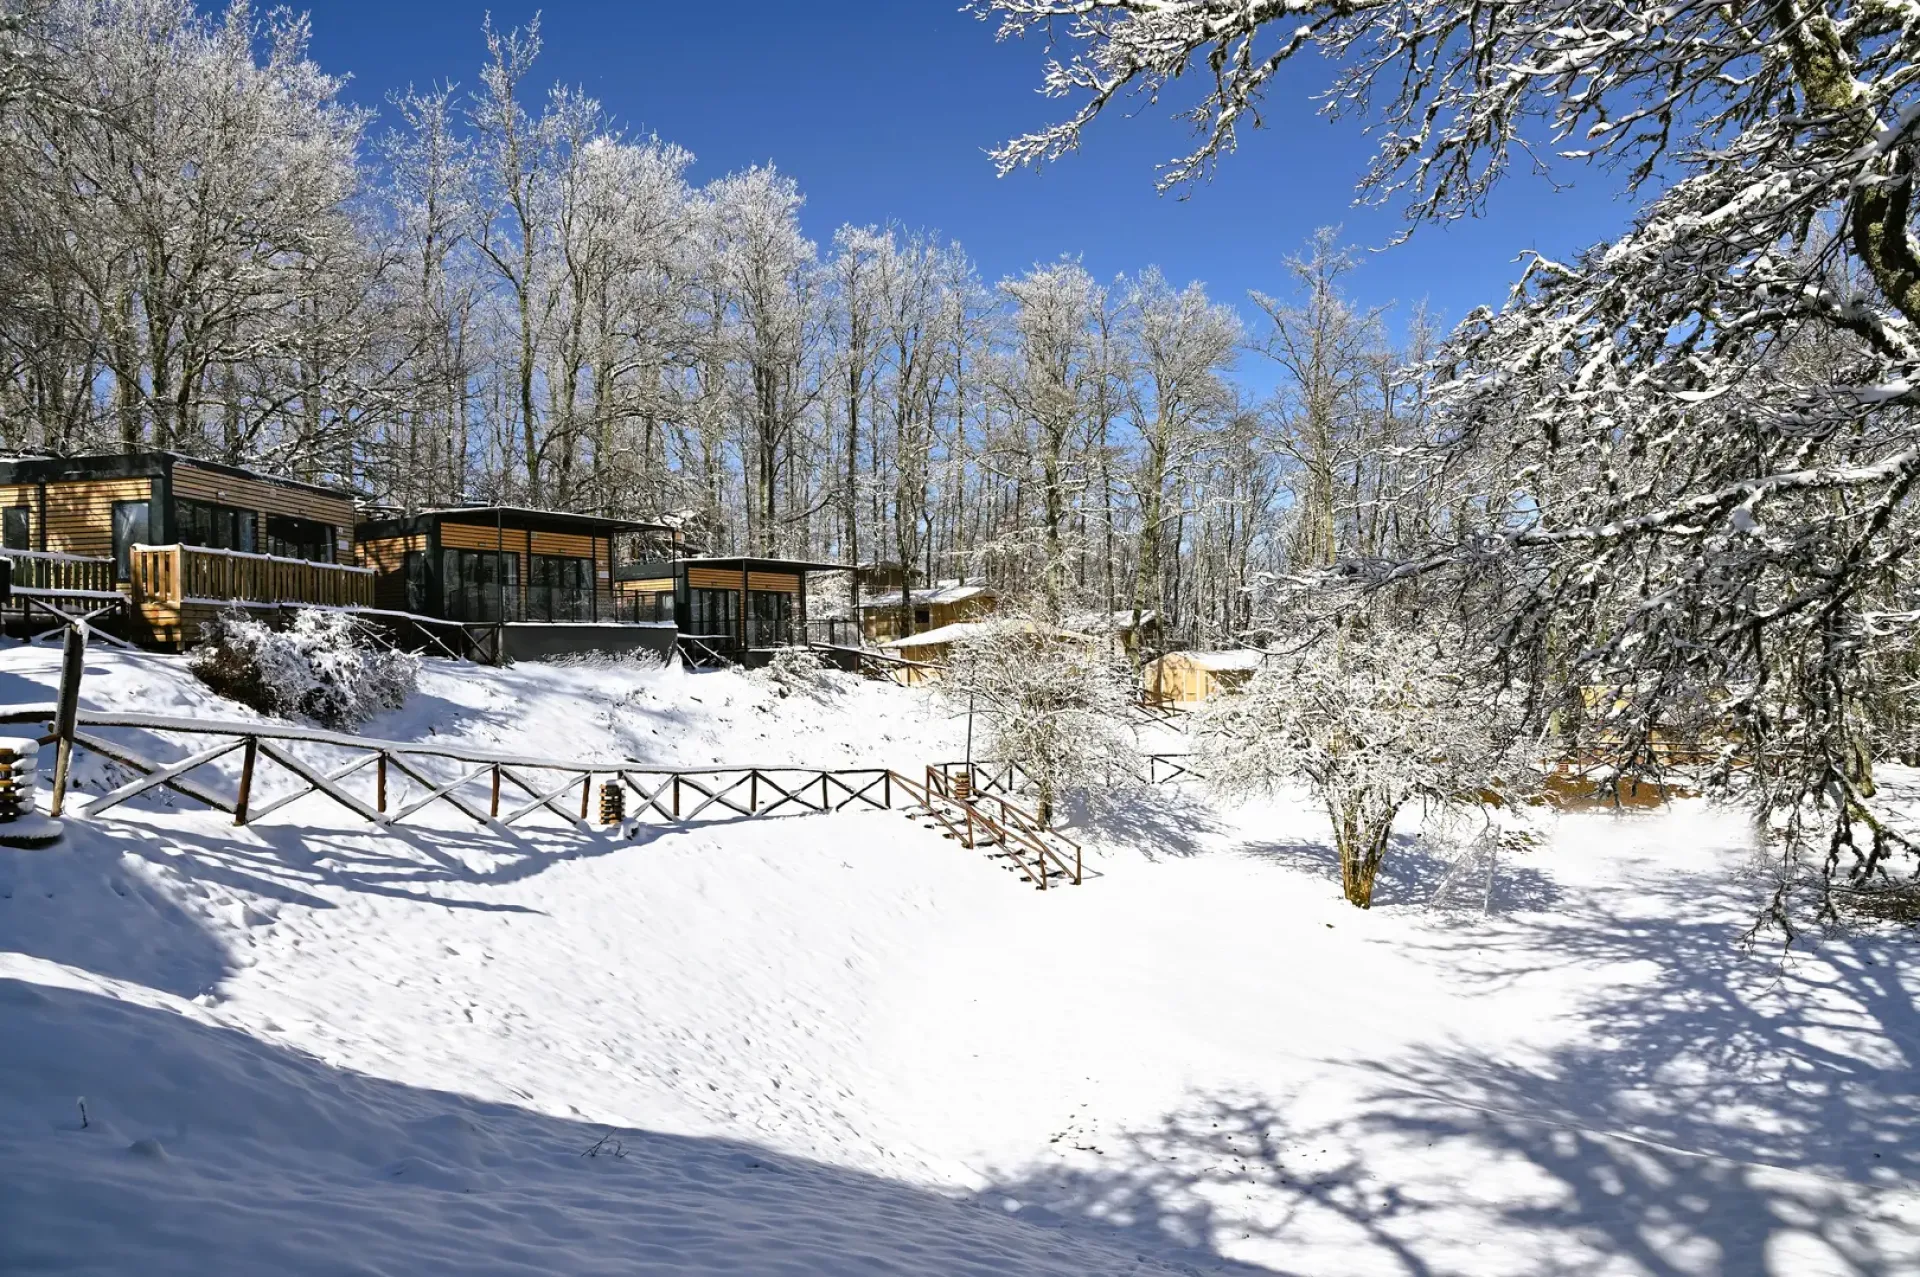 The charm of Glamping in winter